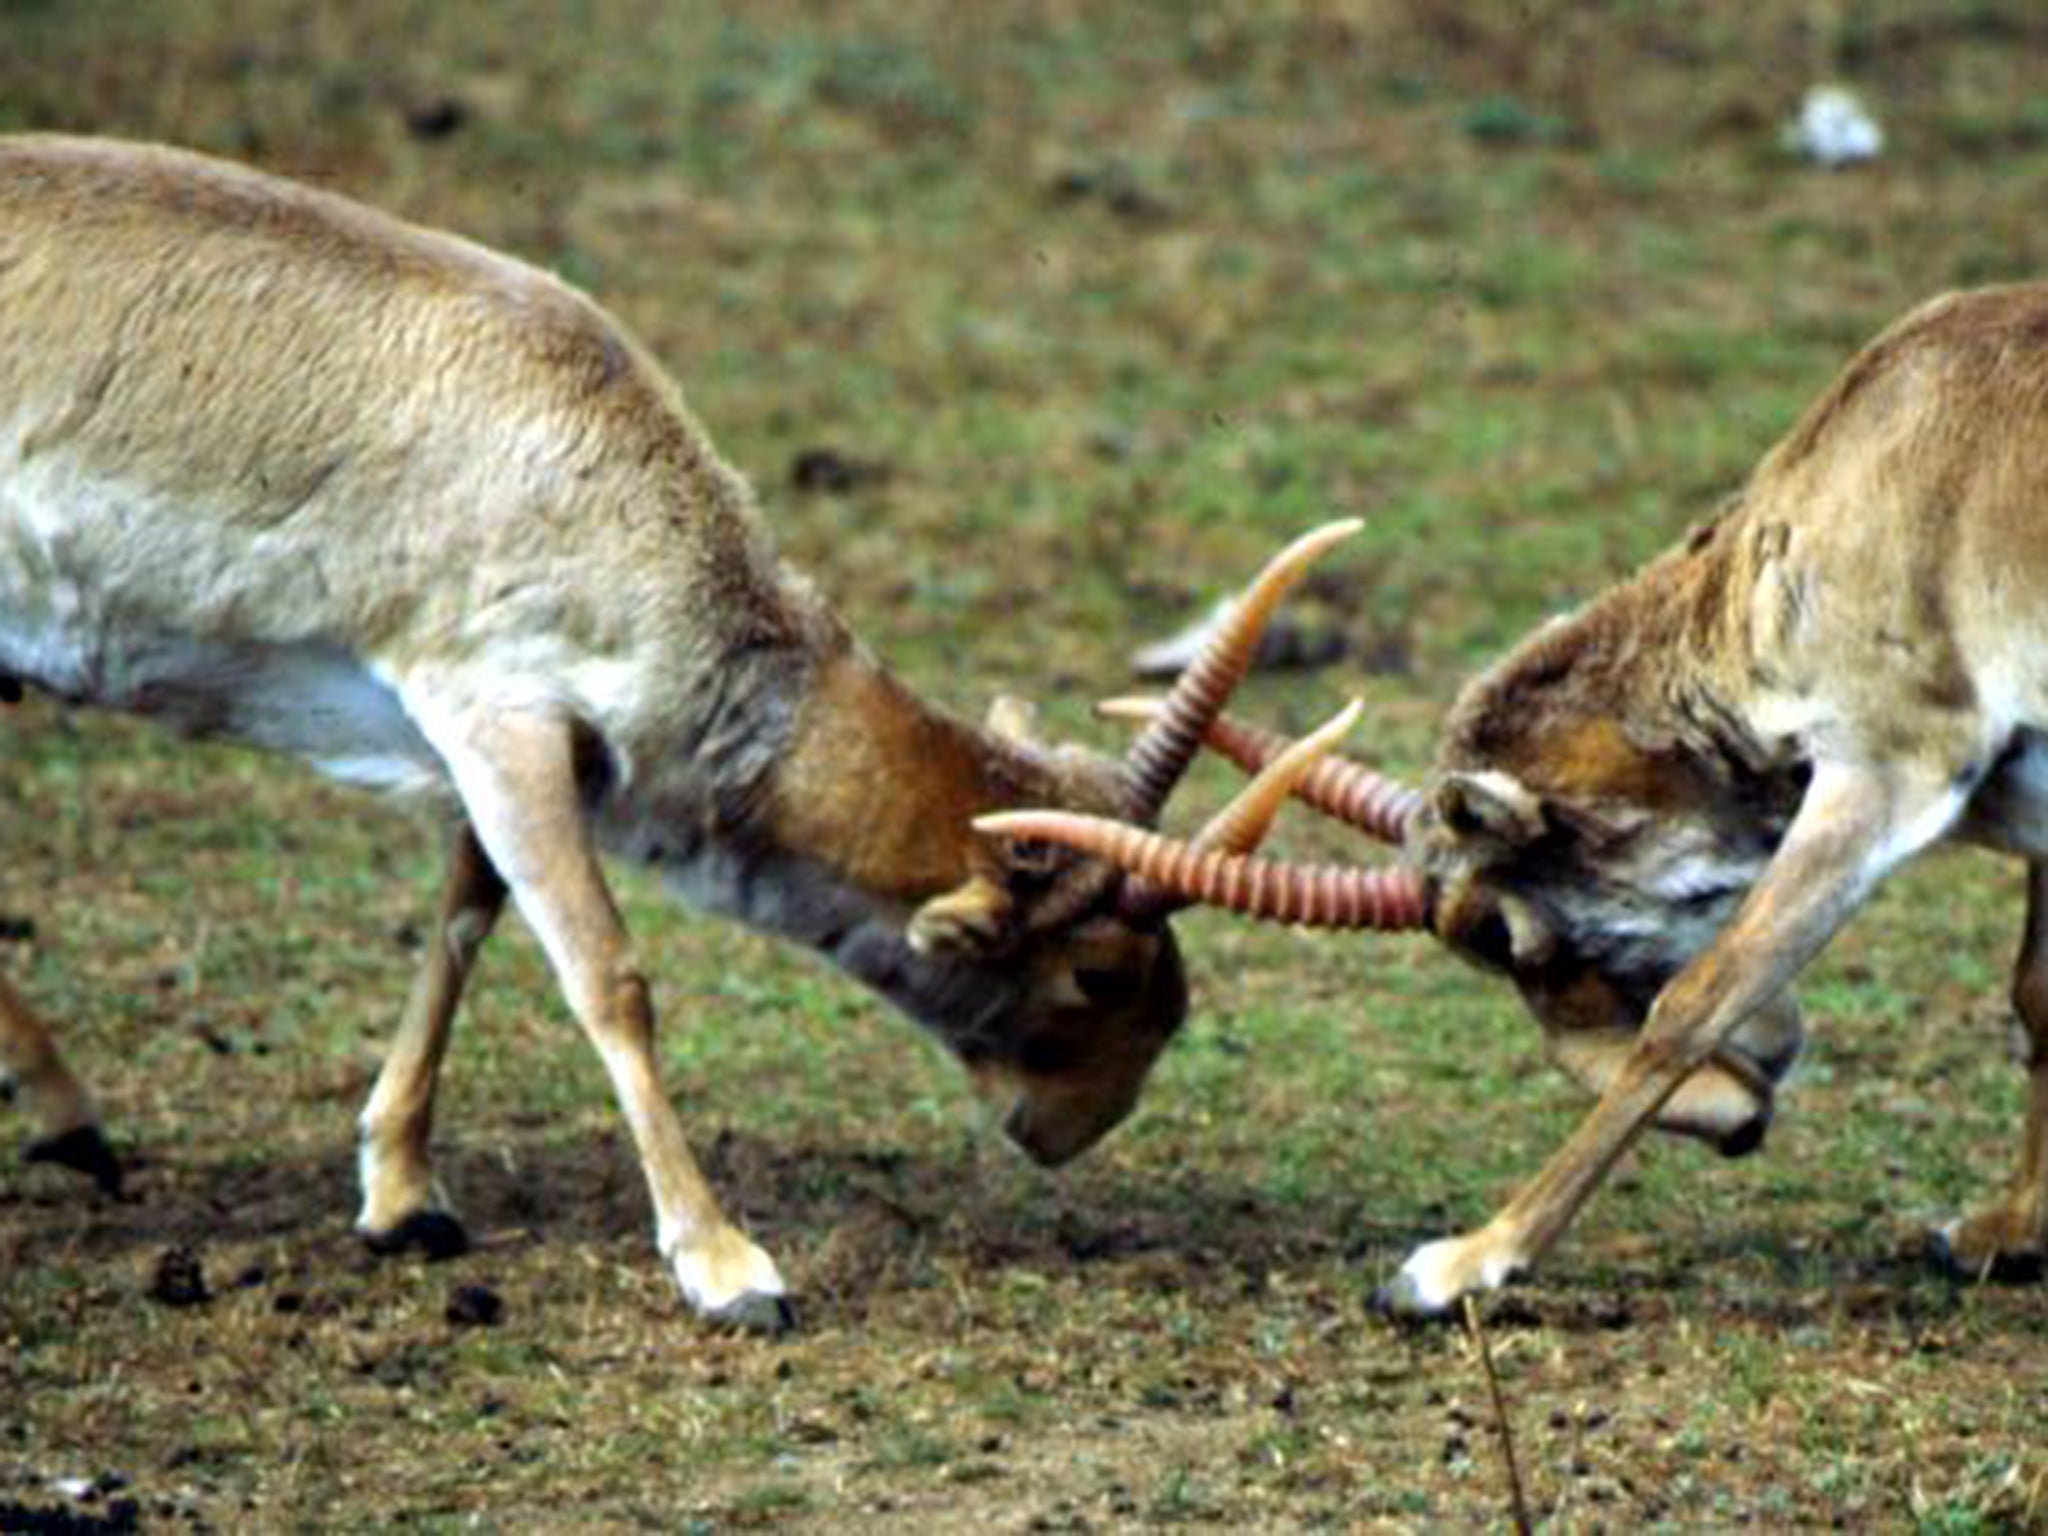 Around one-third of the saiga antelope have died in the past few days